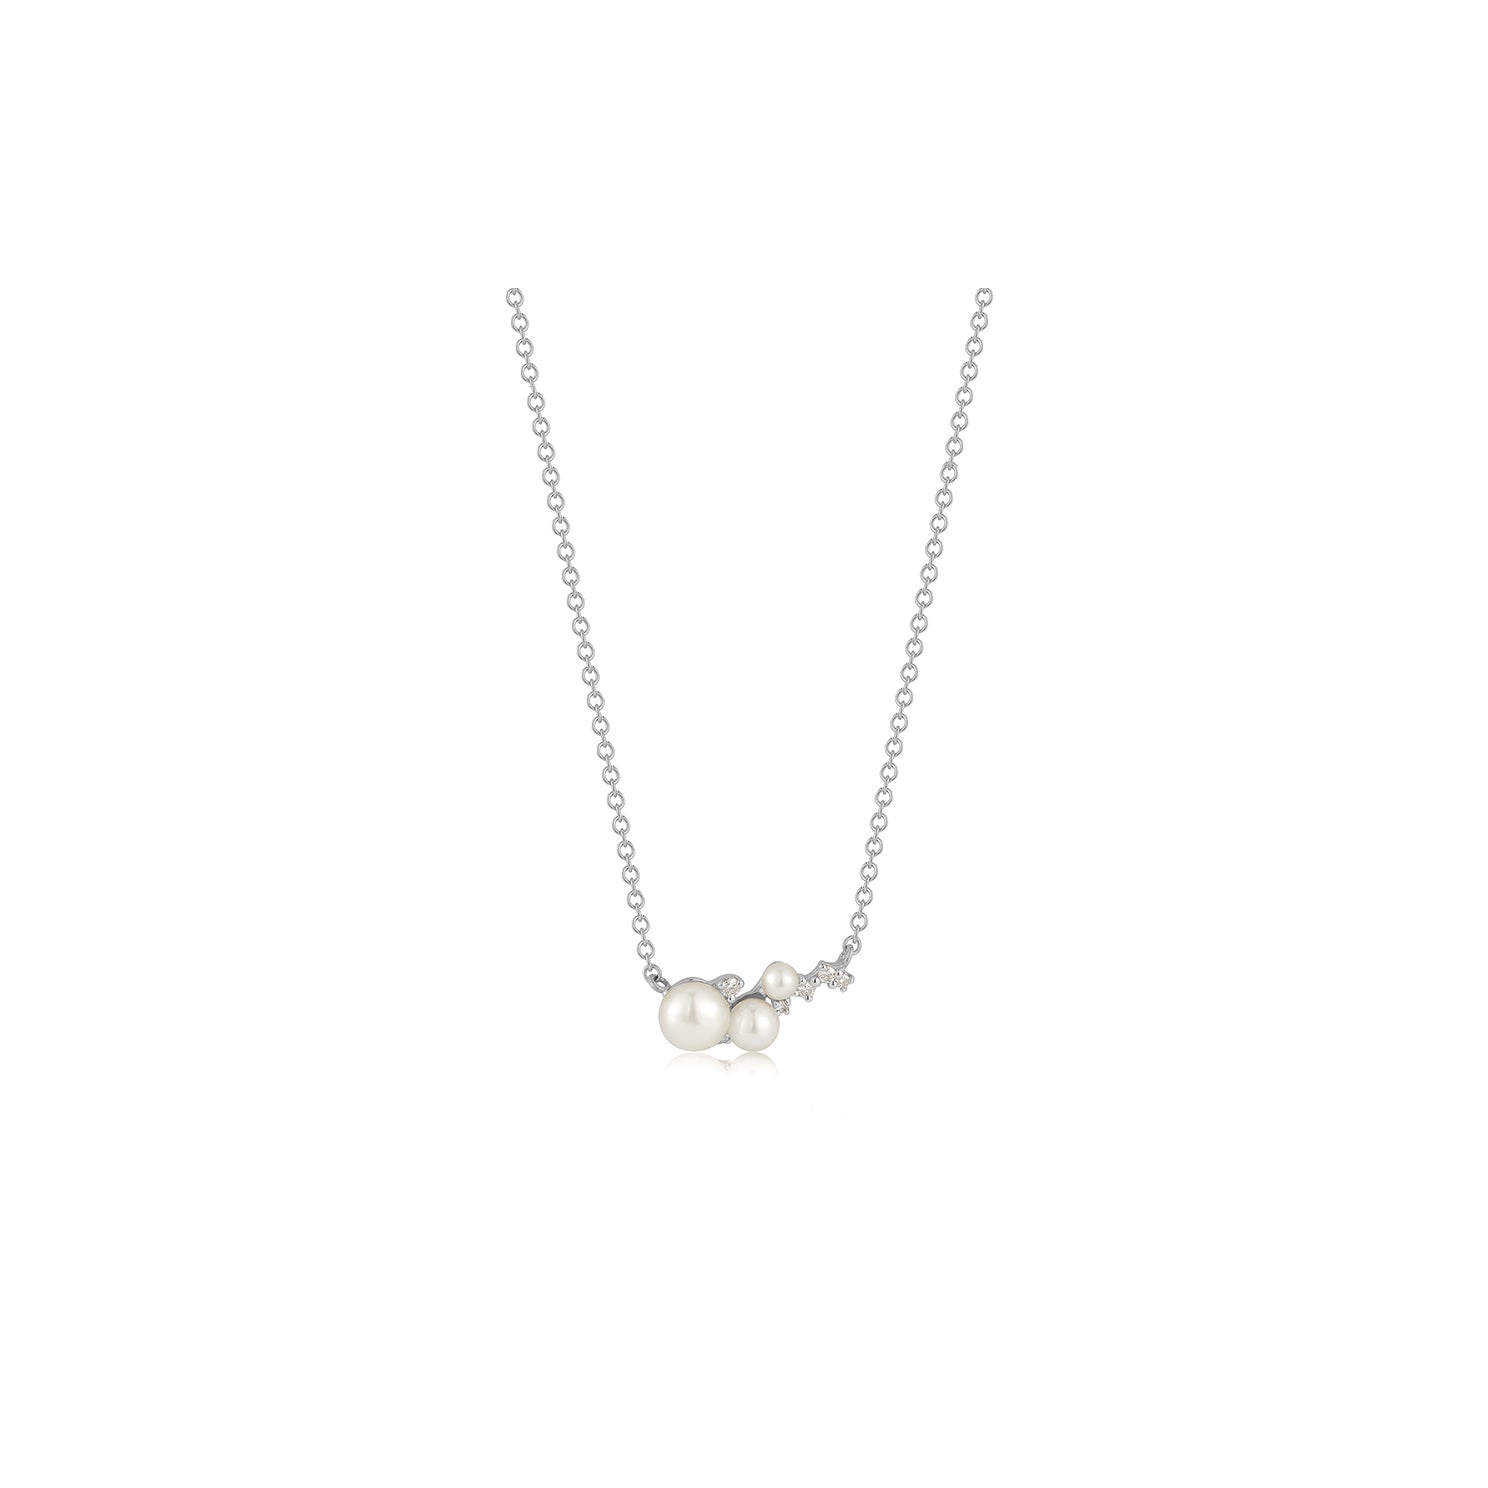 Diamond & Pearl Necklace in 14k white gold